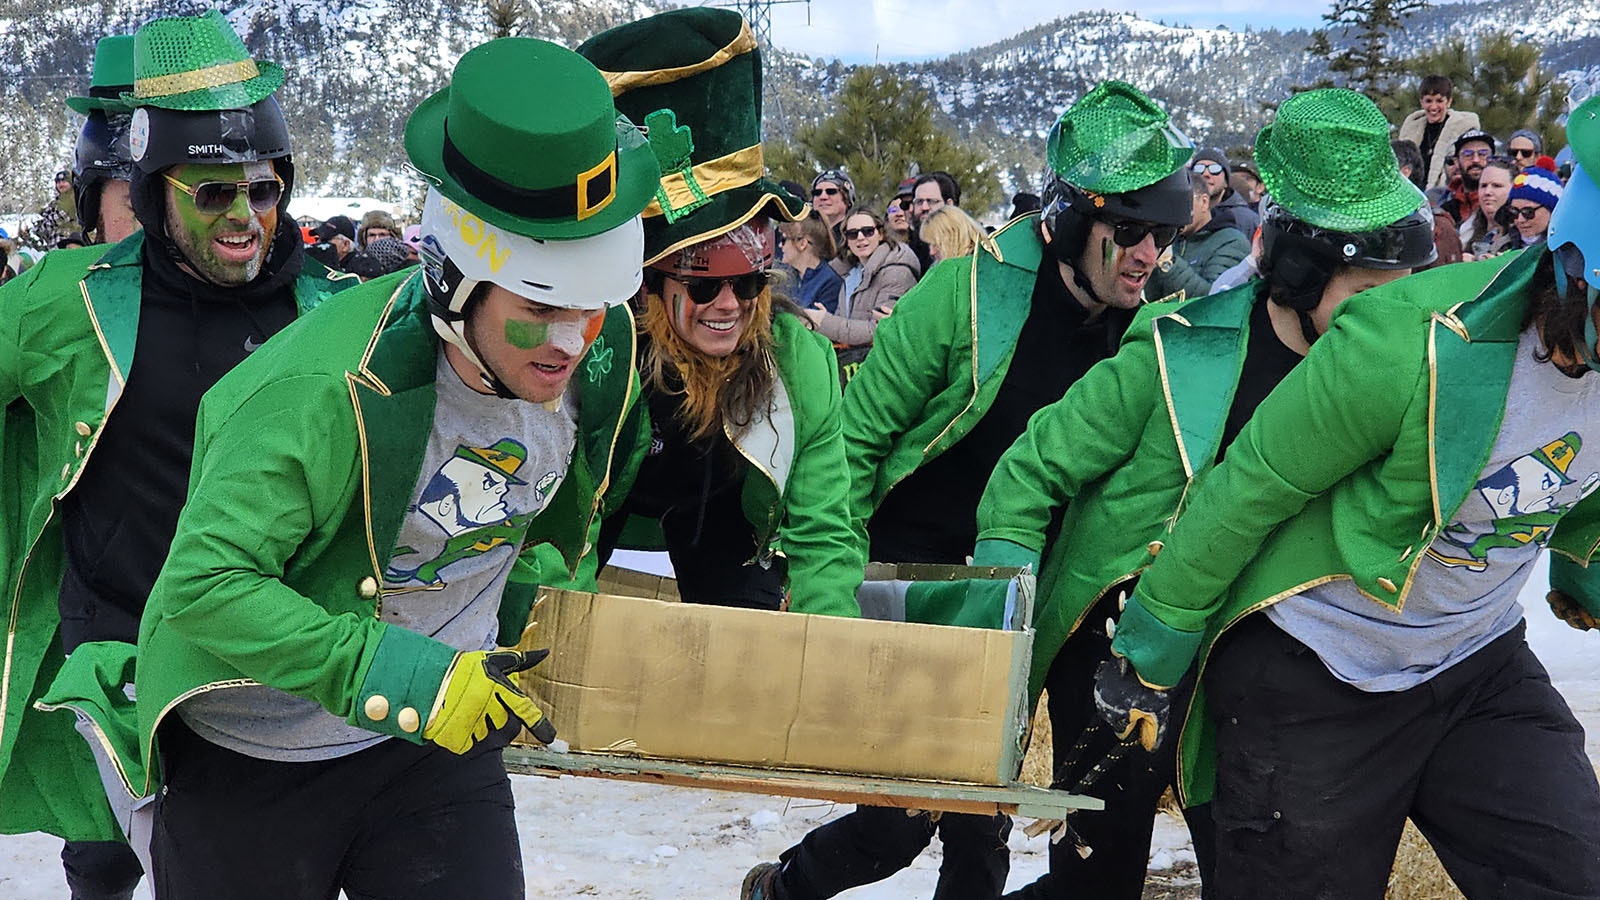 Just look at the intensity on their faces as this team races to the finish line. Even if they're having fun, they're still taking their coffin races pretty seriously.